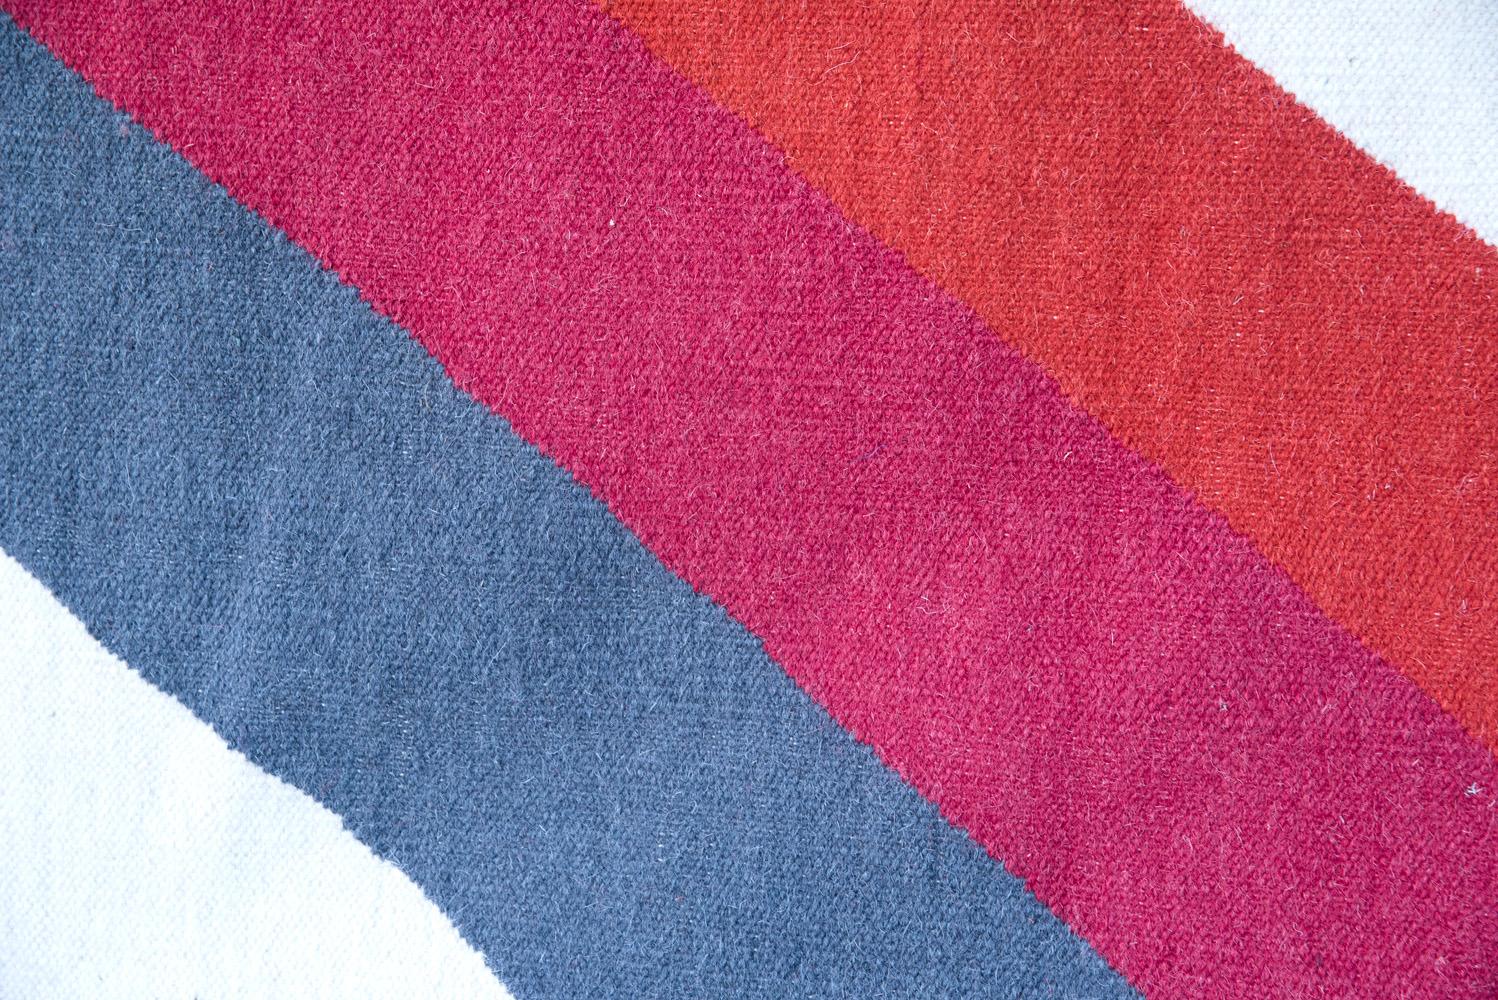 This rug has been ethically handwoven in the finest wool yarns by artisans in north of India, using a traditional weaving technique which is native of this region.
Each rug is handwoven with irregular details to create beautiful imperfections that